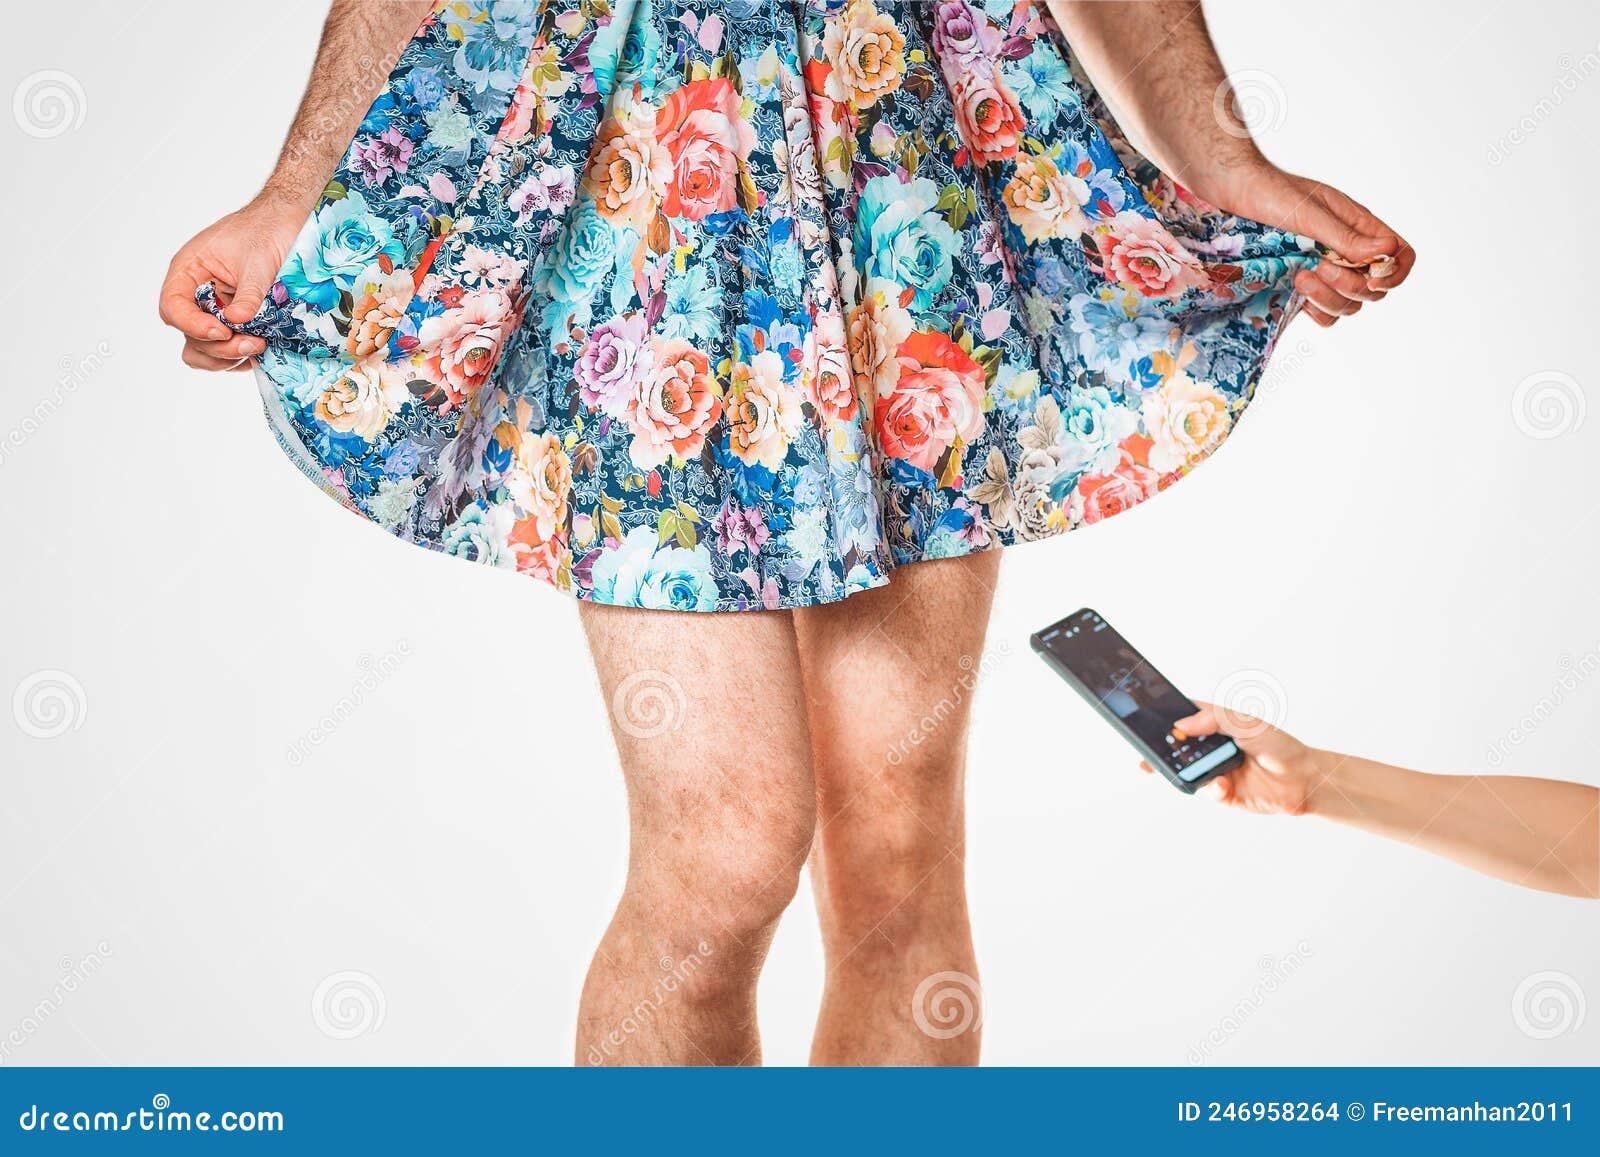 Peeping Skirt Stock Photos image picture